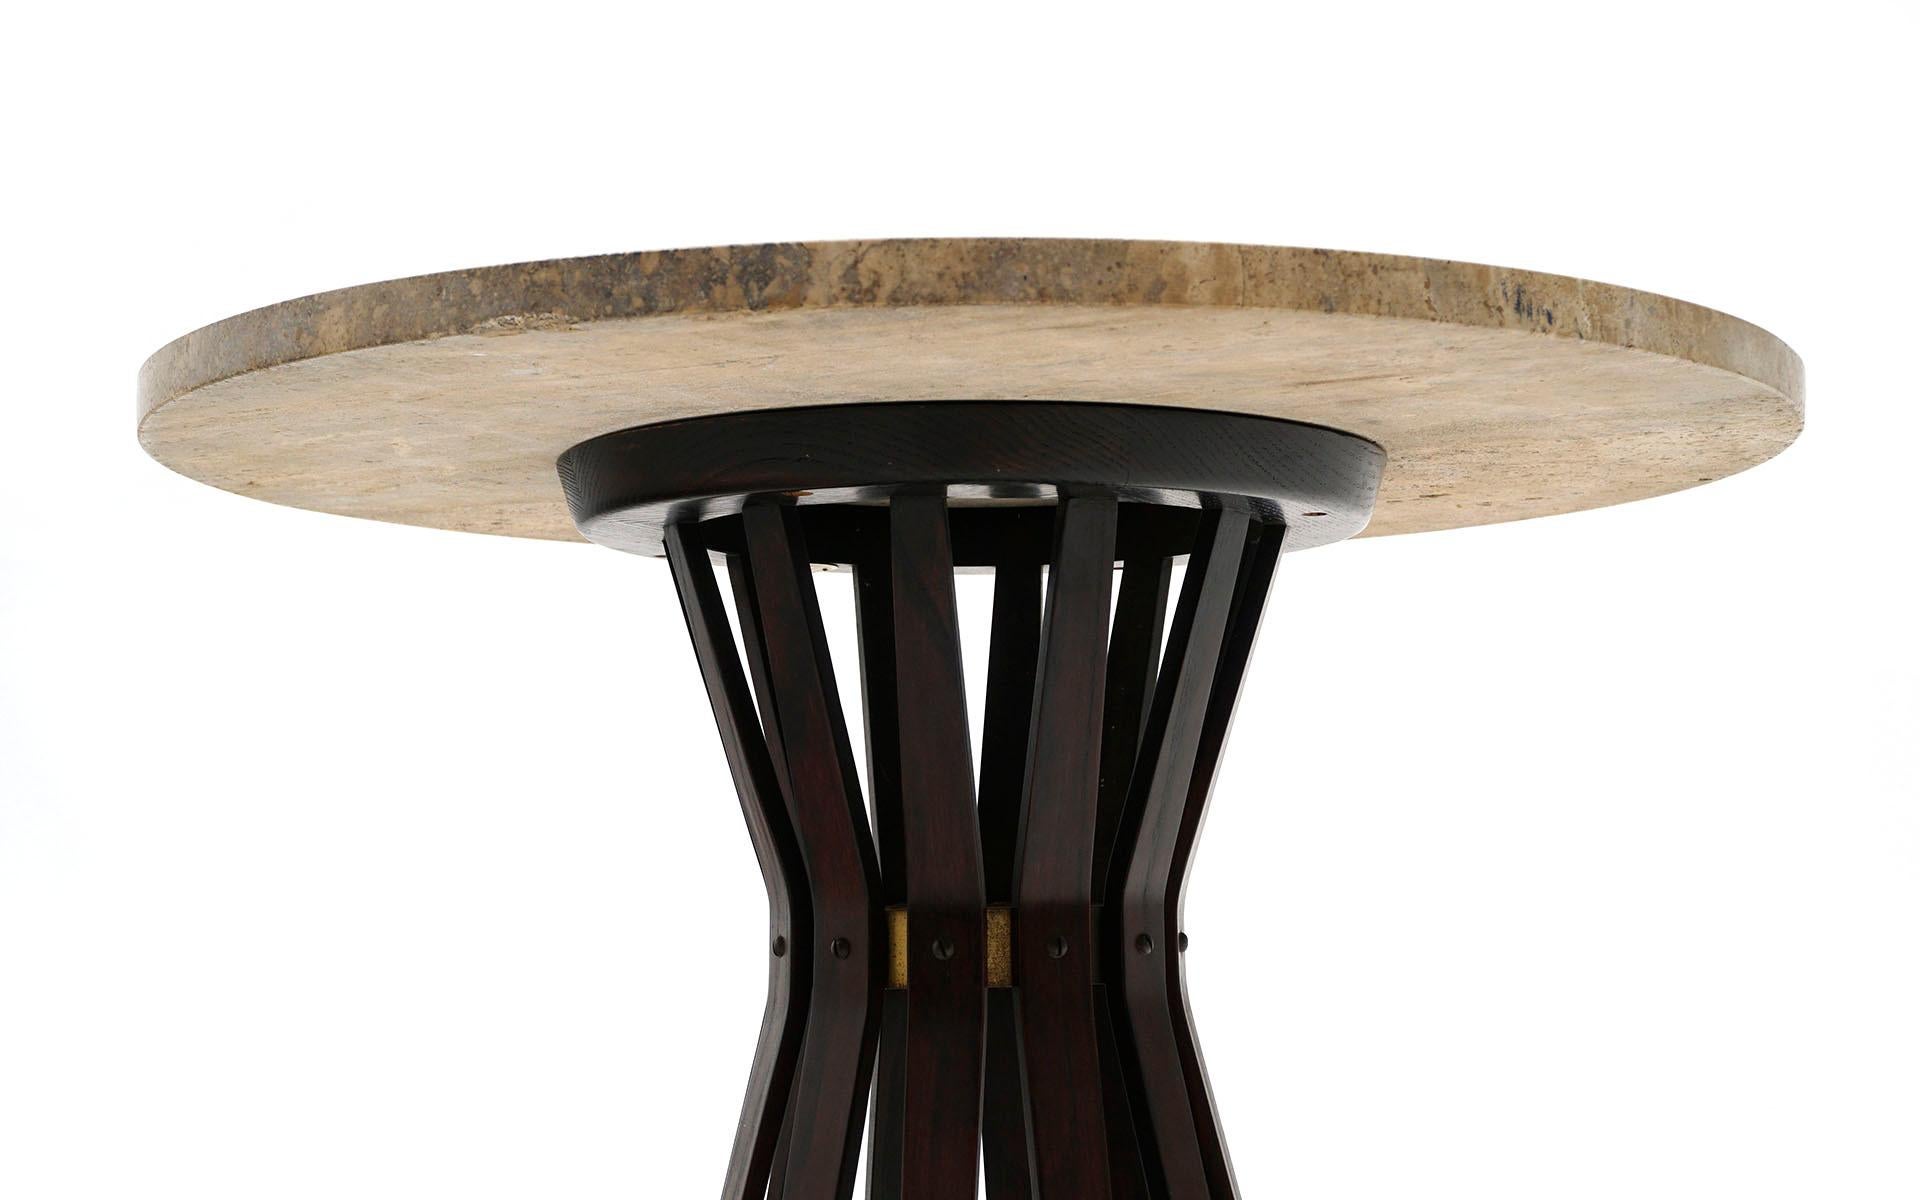 Mid-Century Modern Sheaf of Wheat Side Table by Edward Wormley for Dunbar, Round Travertine Top